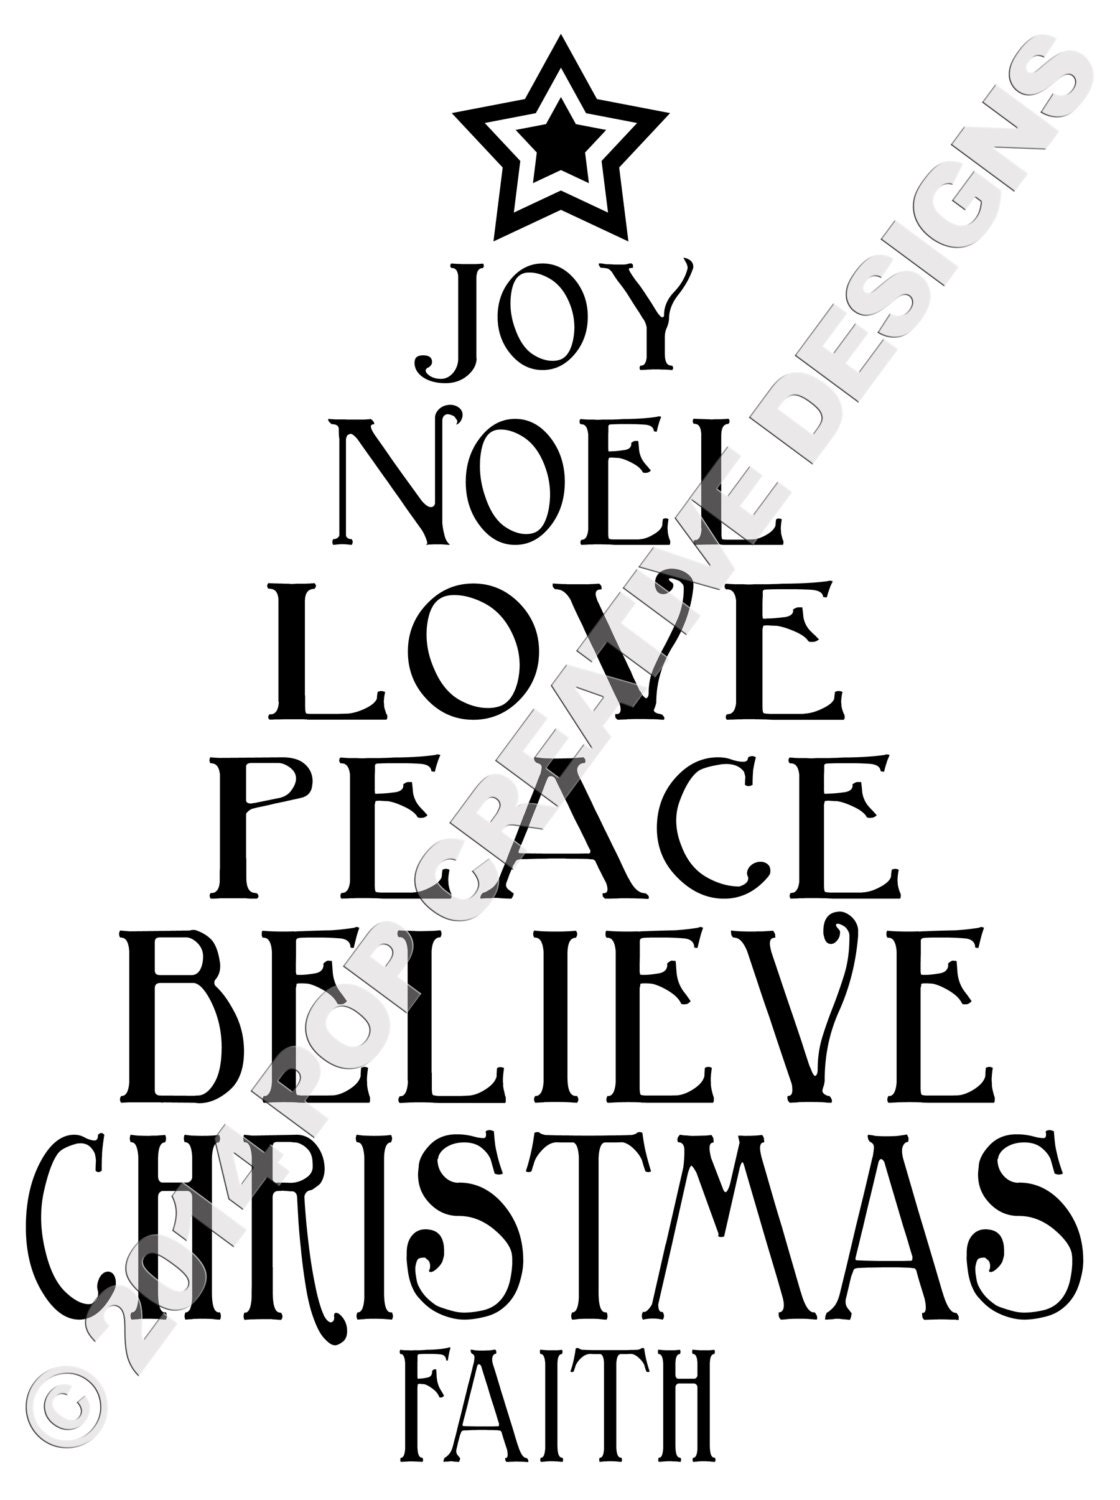 Download Christmas Tree Word Art SVG File by PopCreativeDesigns on Etsy